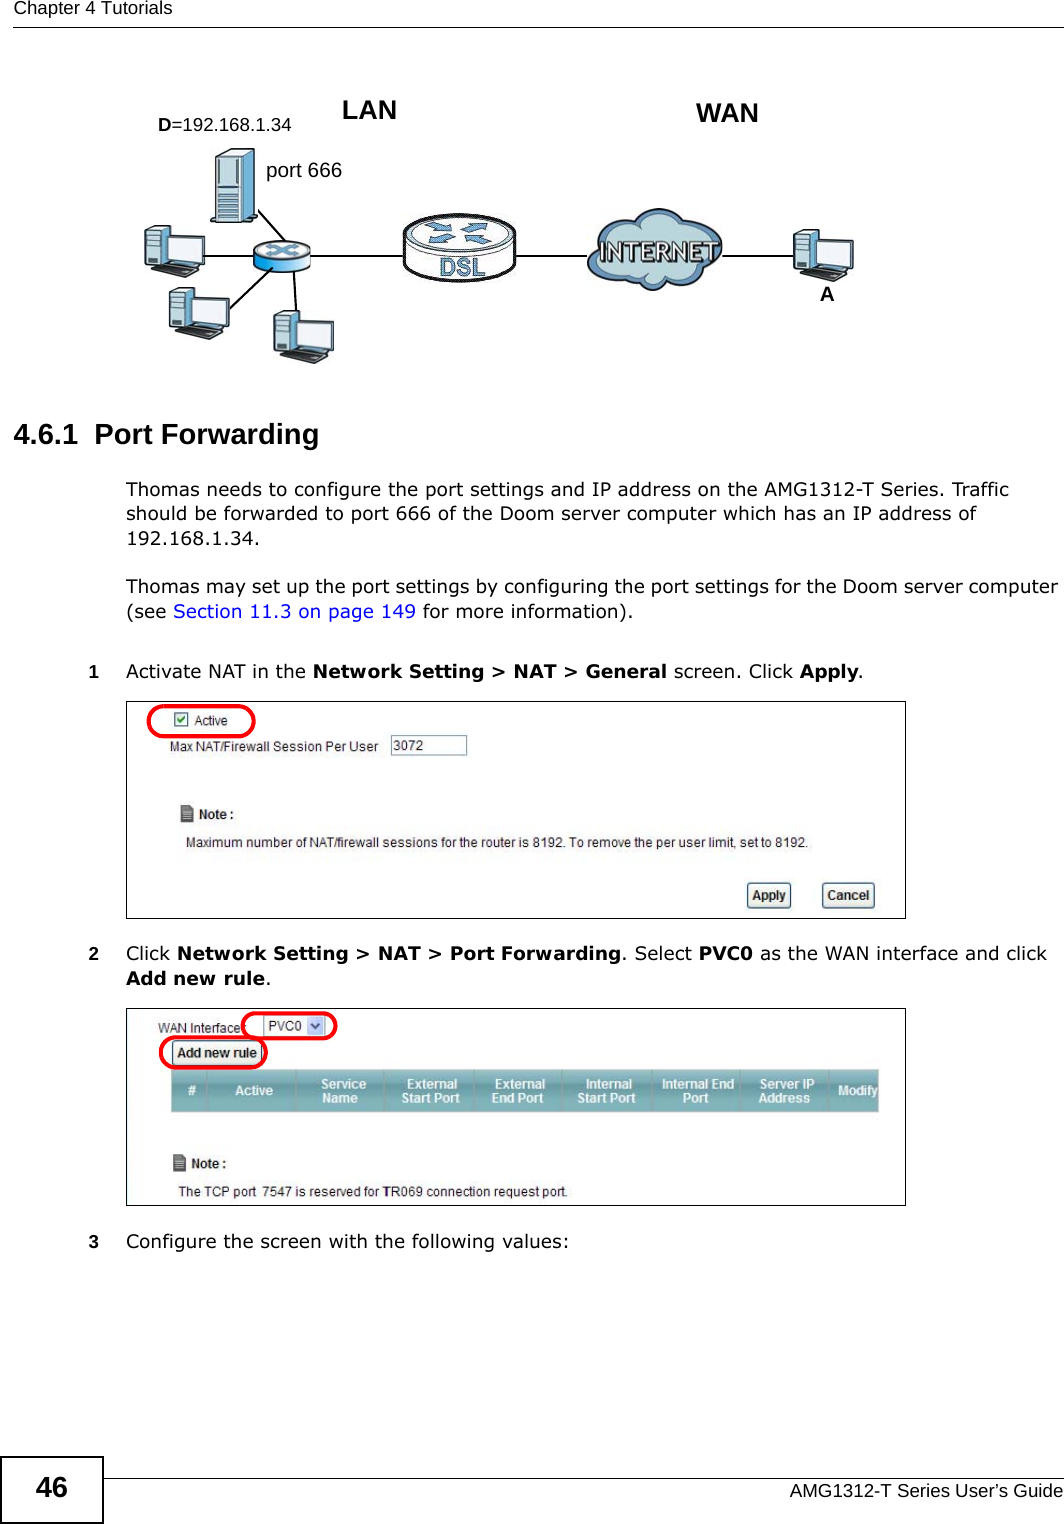 Chapter 4 TutorialsAMG1312-T Series User’s Guide46Tutorial: NAT Port Forwarding Setup 4.6.1  Port ForwardingThomas needs to configure the port settings and IP address on the AMG1312-T Series. Traffic should be forwarded to port 666 of the Doom server computer which has an IP address of 192.168.1.34.Thomas may set up the port settings by configuring the port settings for the Doom server computer (see Section 11.3 on page 149 for more information).1Activate NAT in the Network Setting &gt; NAT &gt; General screen. Click Apply.2Click Network Setting &gt; NAT &gt; Port Forwarding. Select PVC0 as the WAN interface and click Add new rule.3Configure the screen with the following values:D=192.168.1.34 WANLANport 666A